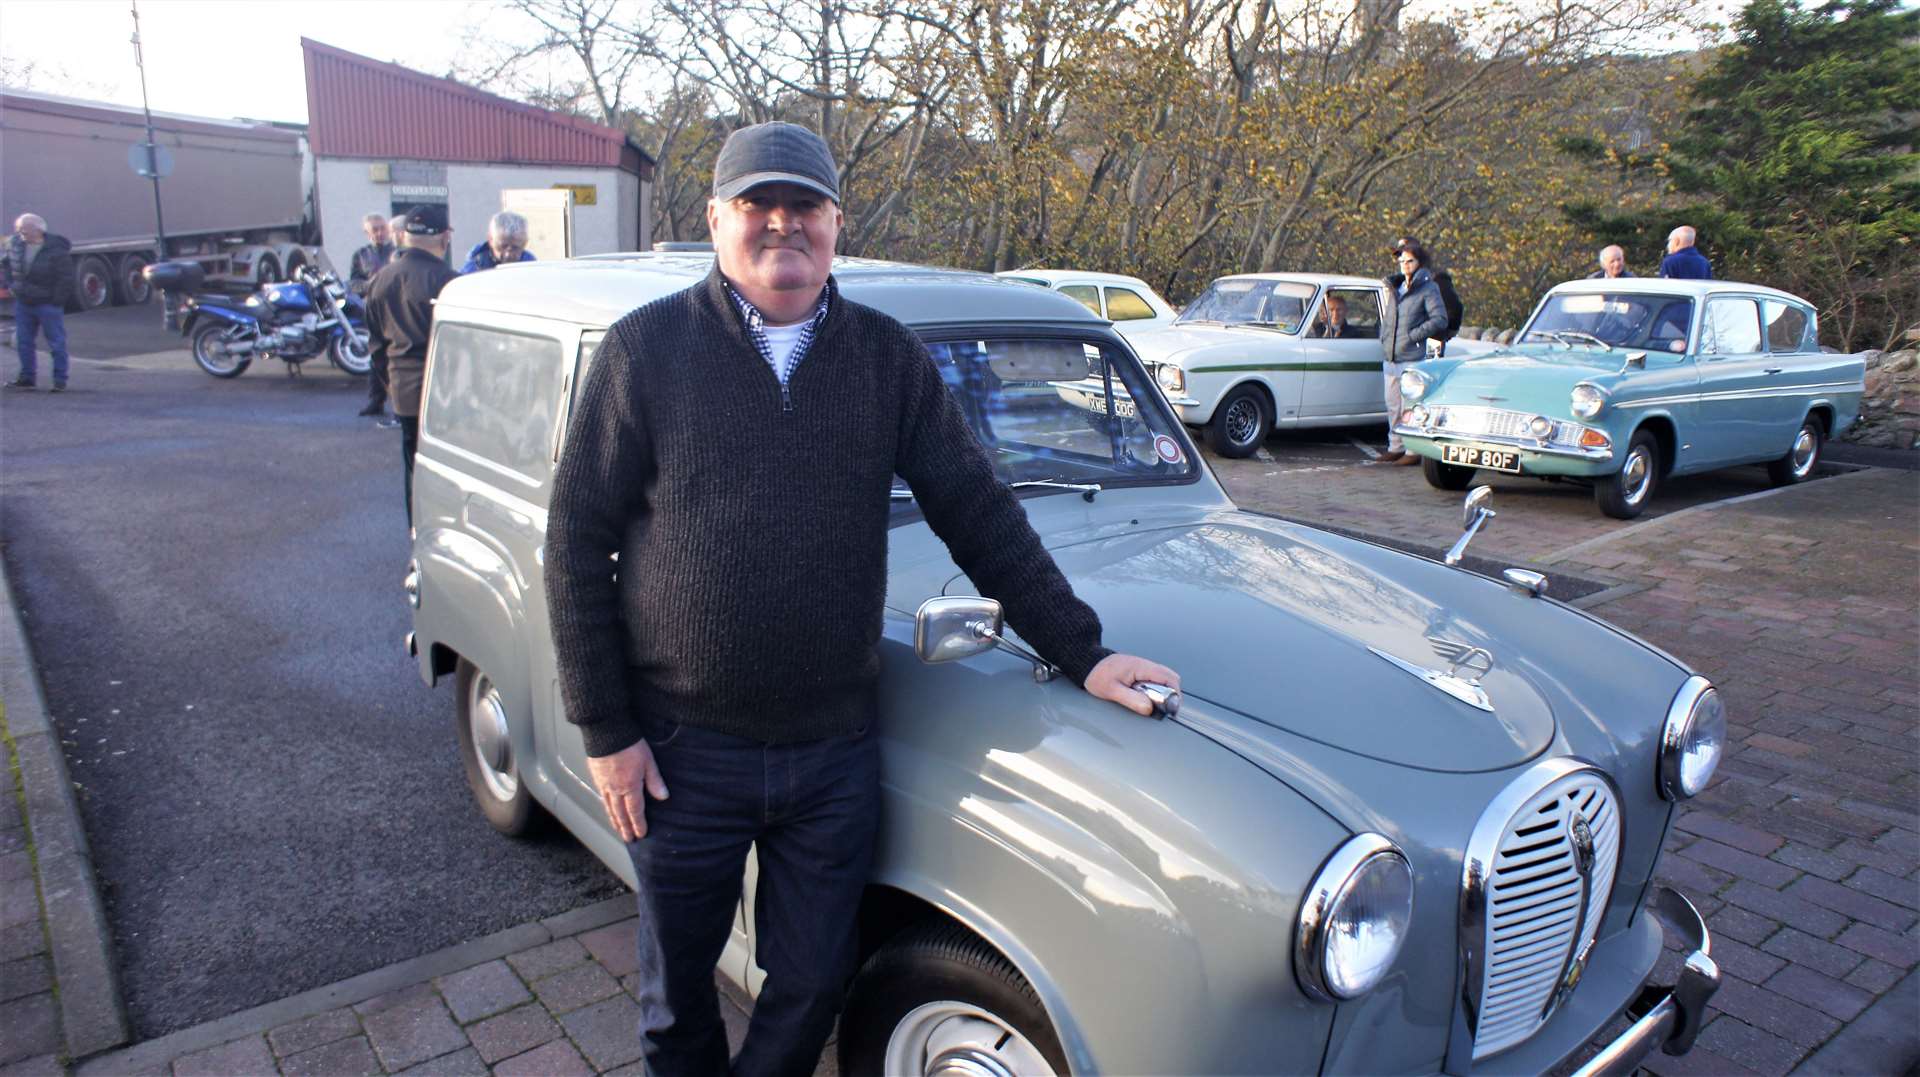 Club chair Kevin Sutherland at Helmsdale for the start of the David Green memorial run. He calls his 1960 Austin A35 van Hyacinth as the registration has HYC in it. Picture: DGS